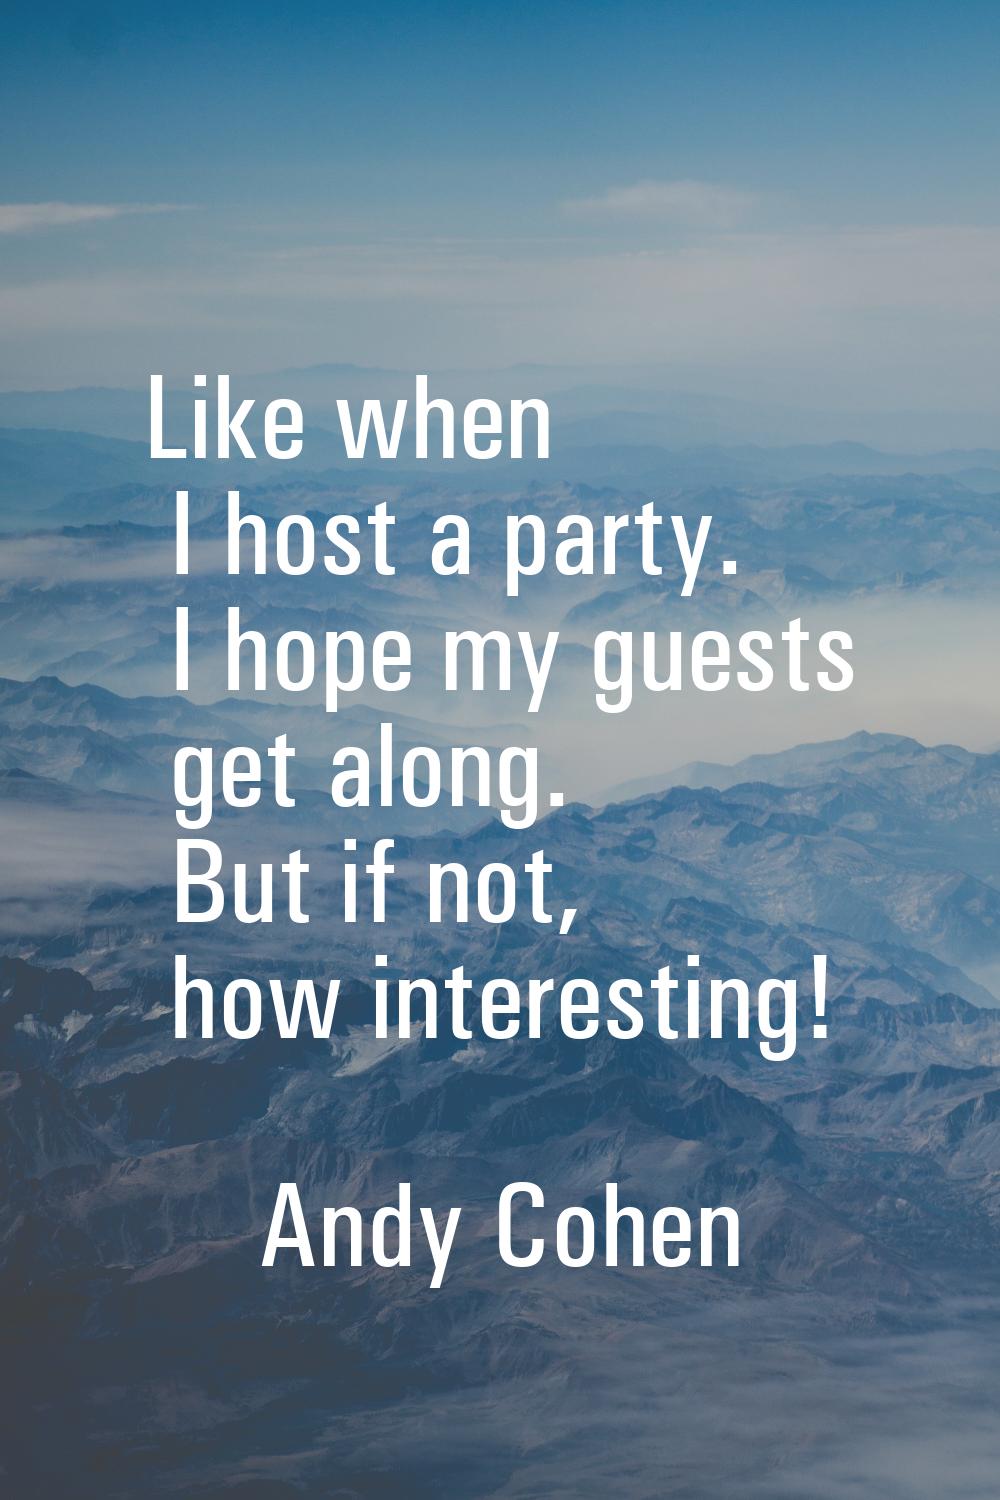 Like when I host a party. I hope my guests get along. But if not, how interesting!